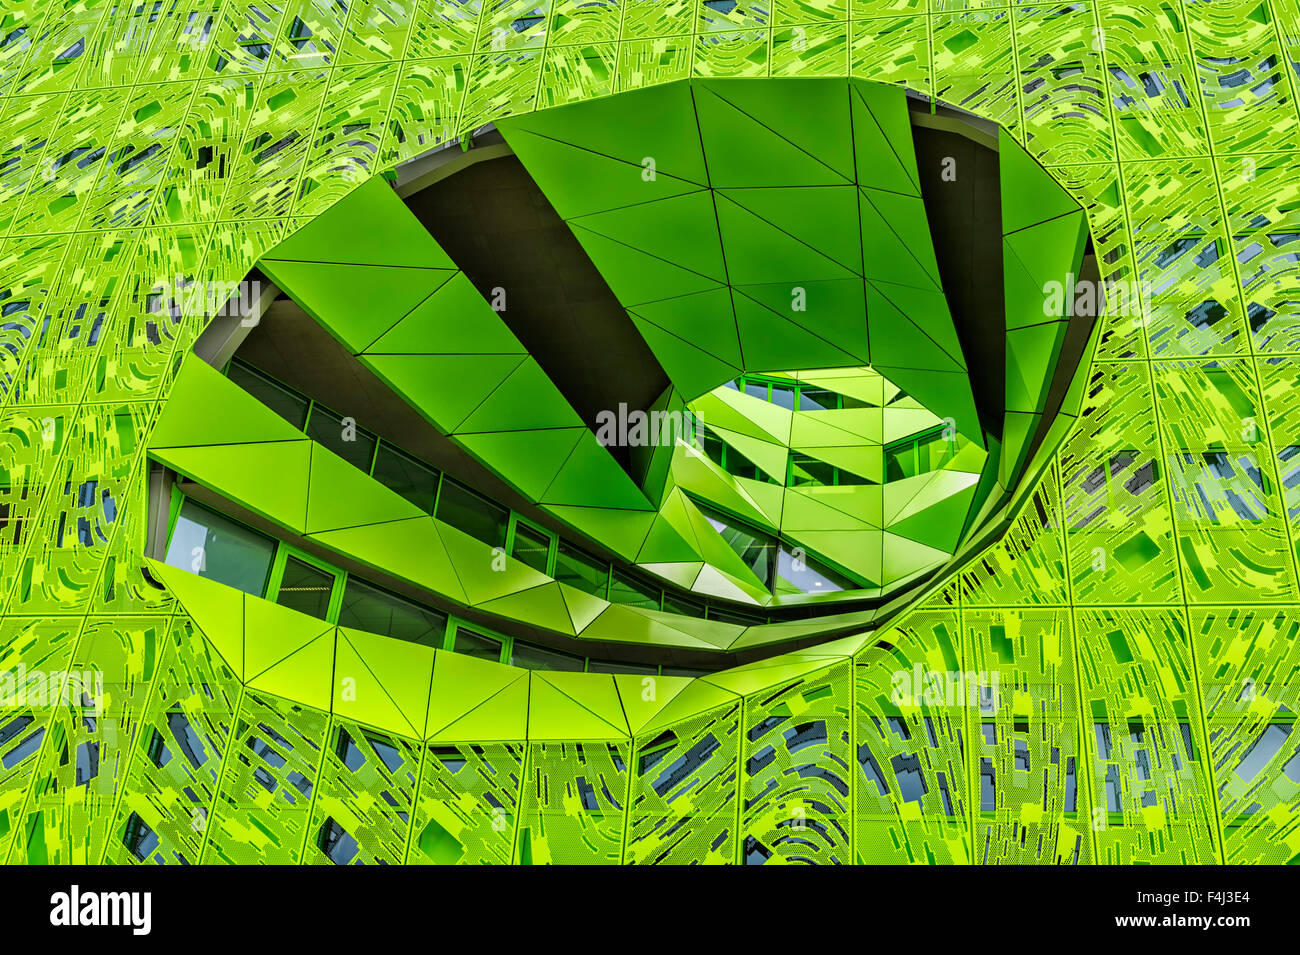 Green Cube, Headquarters of television channel Euronews, La Confluence district, Lyon, Rhone, France, Europe Stock Photo